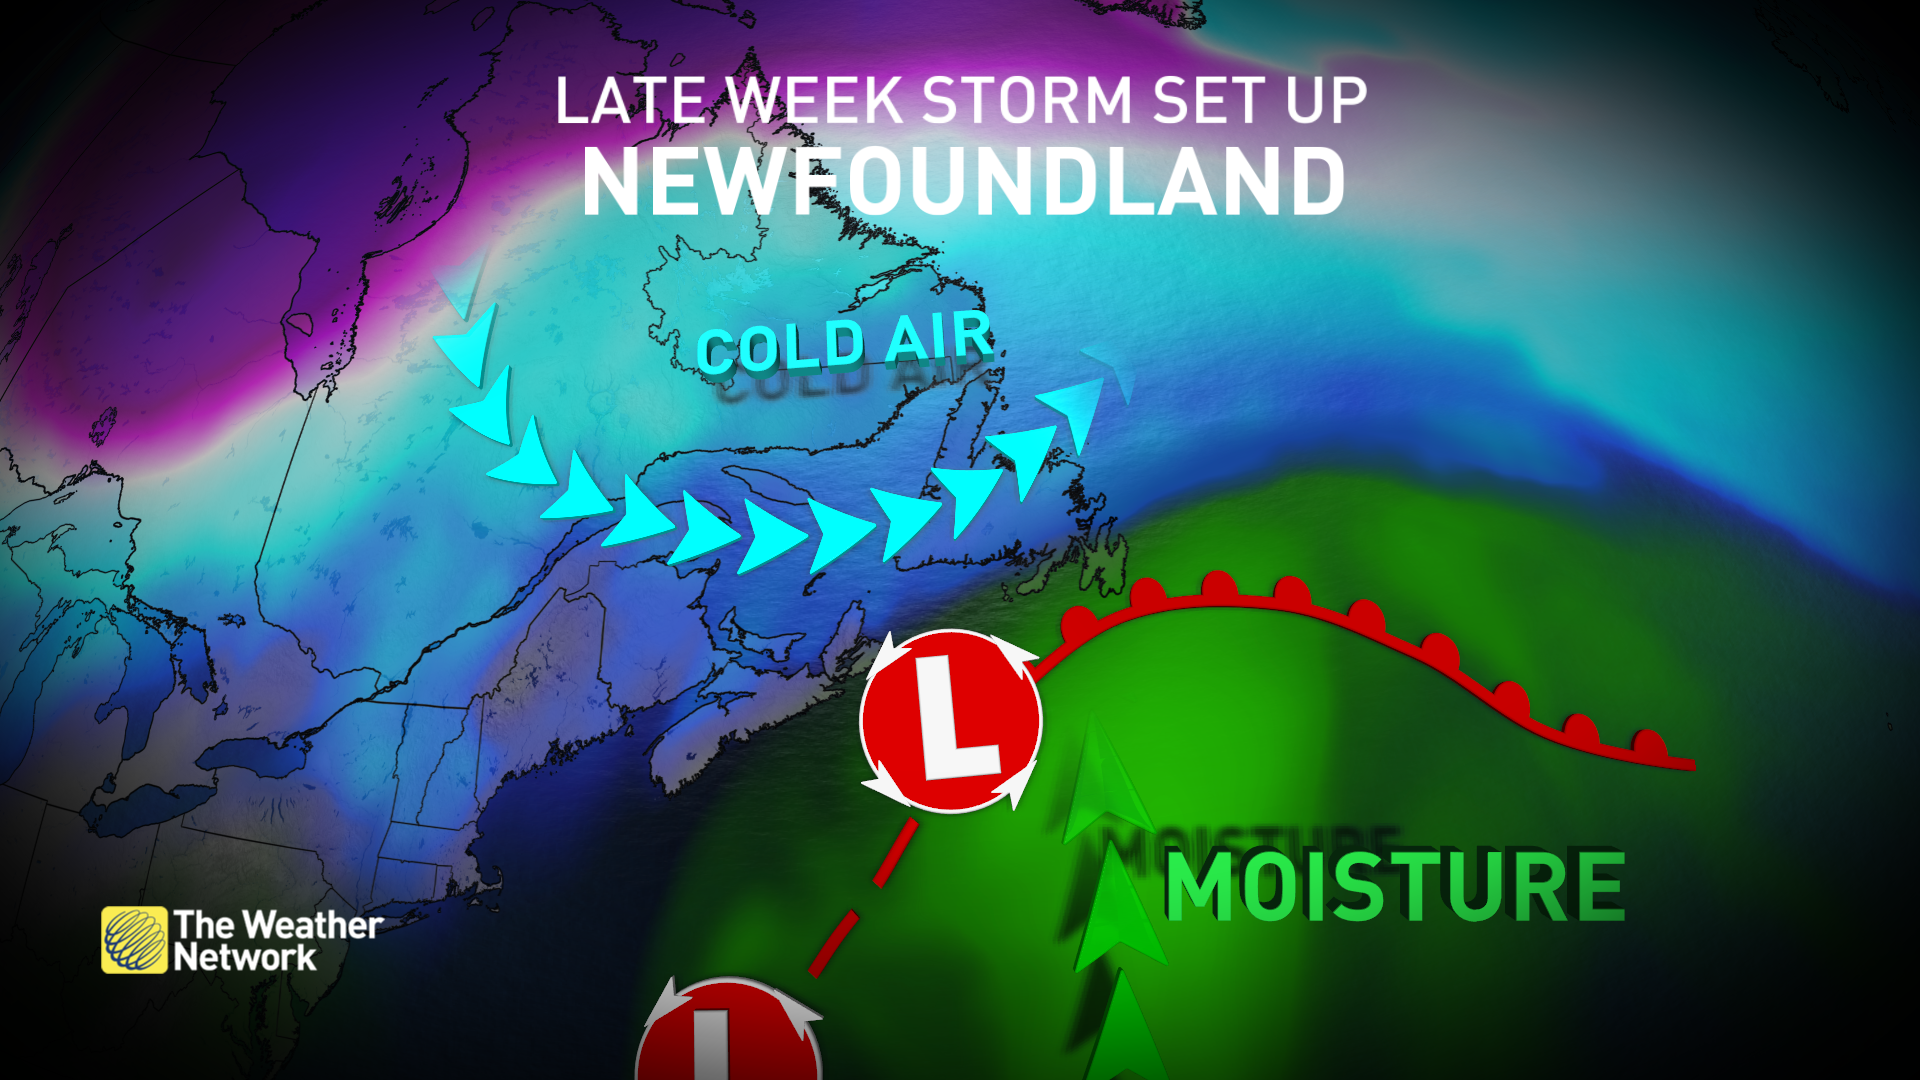 heavy snow and ice threaten travel troubles, power outages in newfoundland